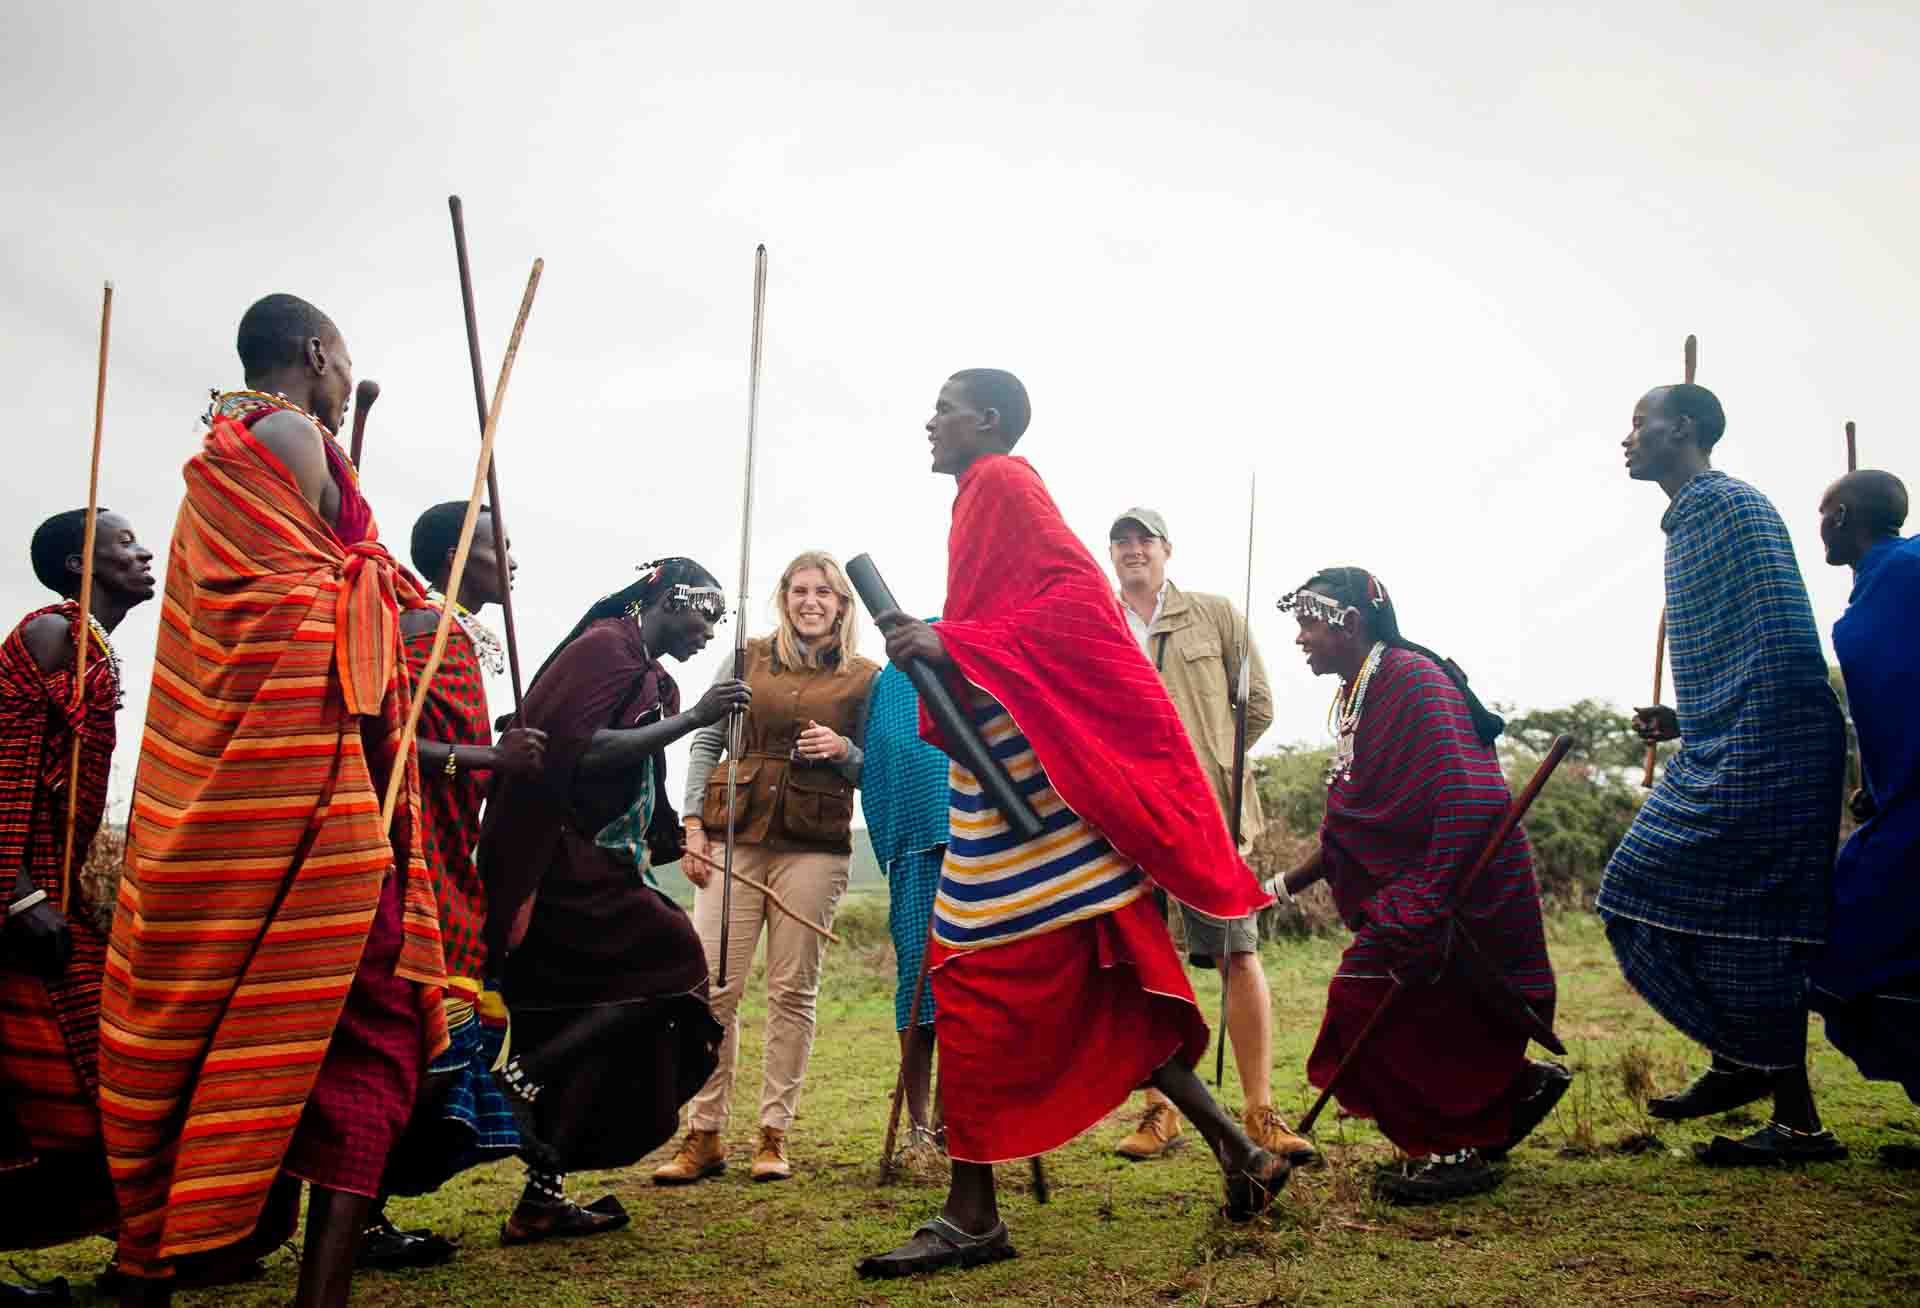 A group of Maasai warriors doing a traditional jumping dance at Entumano Private